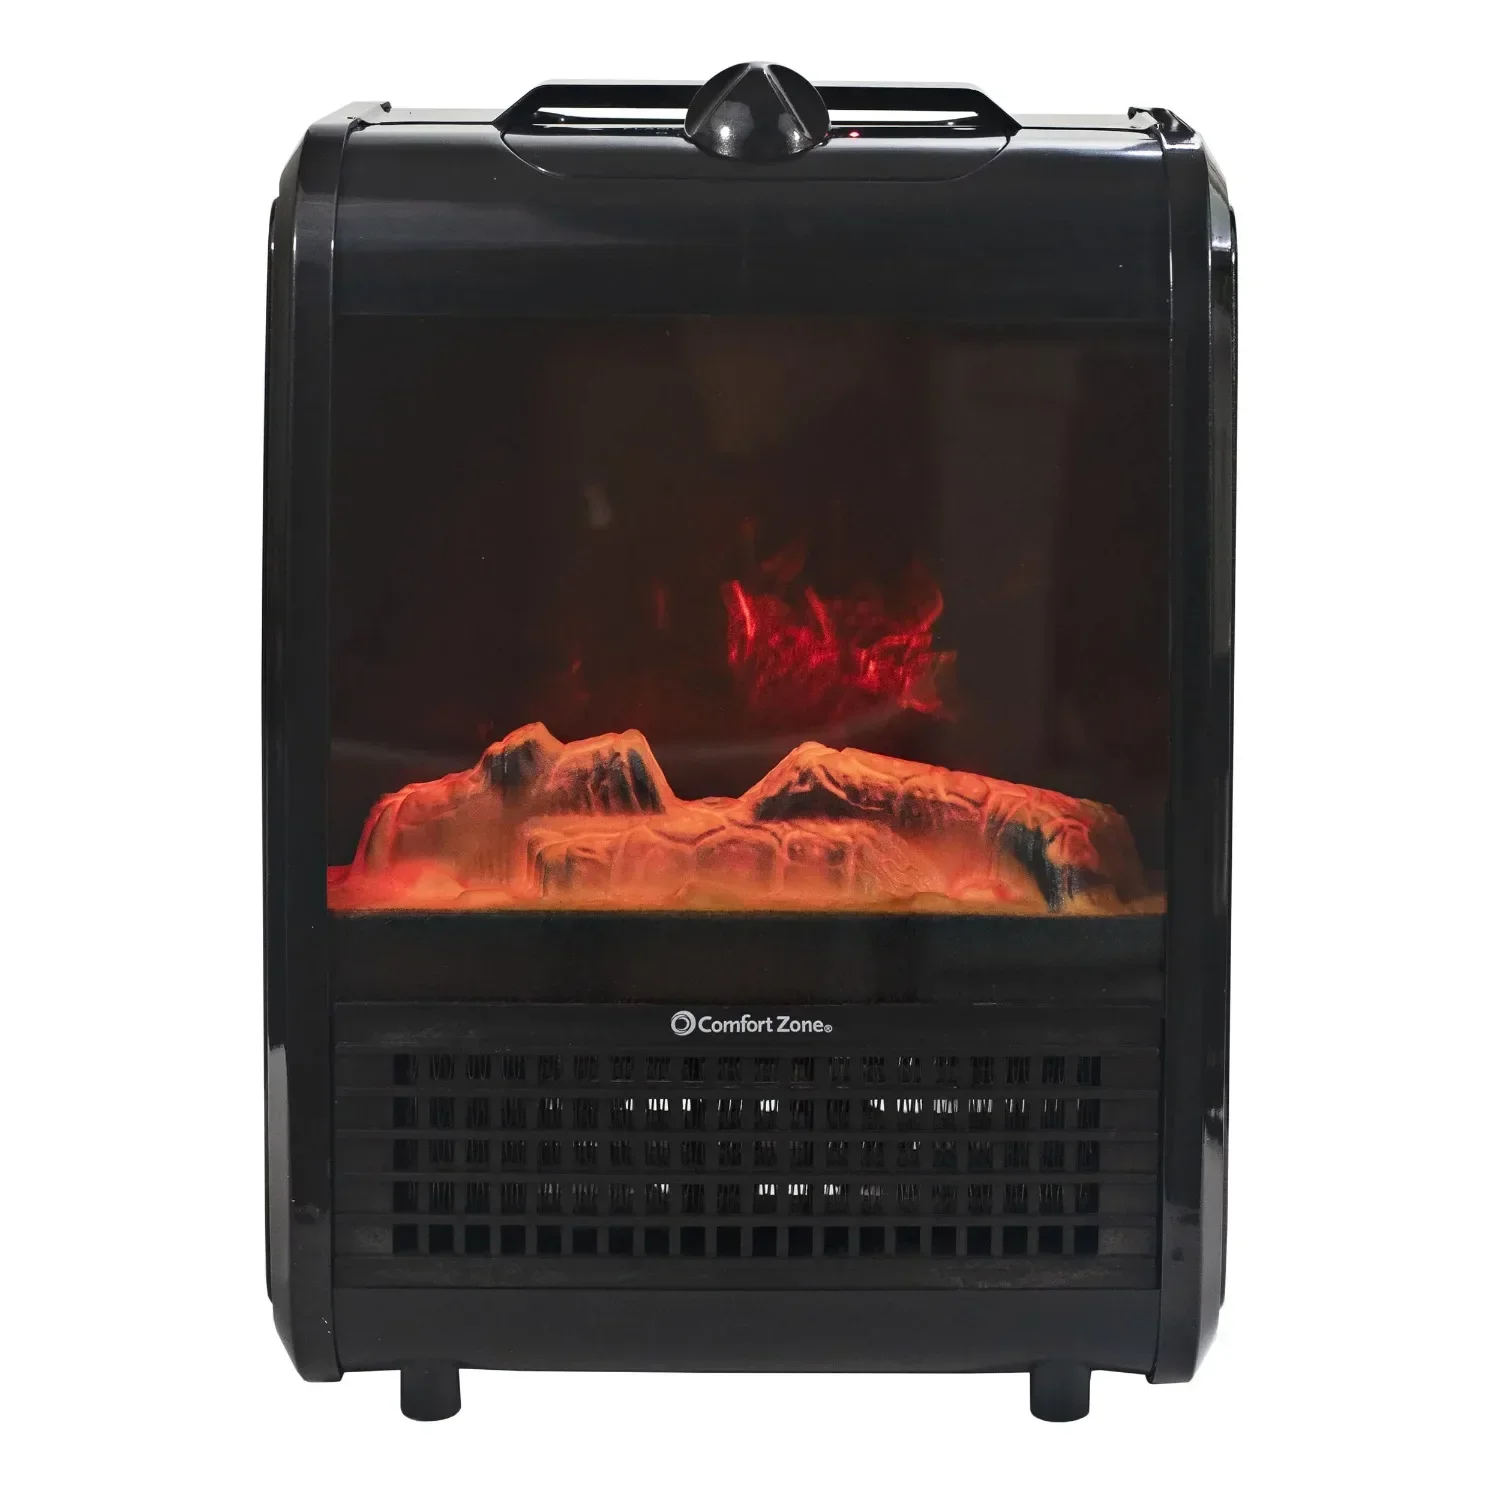 

Ceramic Electric Fireplace Heater, 1200w Black and Red handy heater